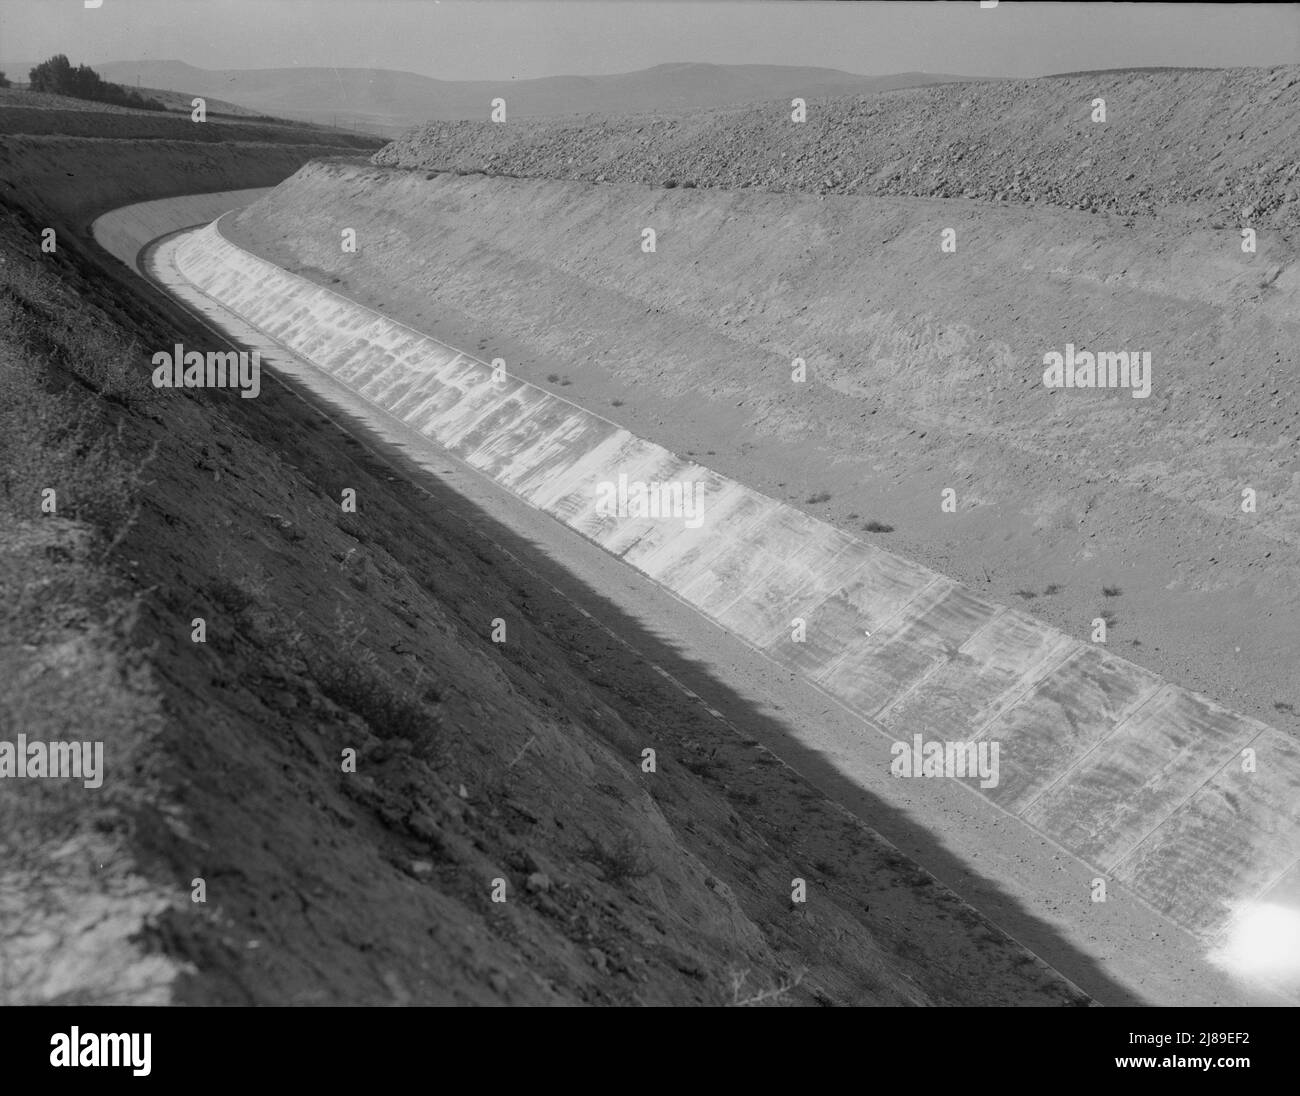 Washington, Yakima County, Roza Irrigation Canal. Sides concrete, lined by machine. The project, when complete in 1945, will open 72,000 acres to cultivation in East Yakima and West Benton Counties. Stock Photo